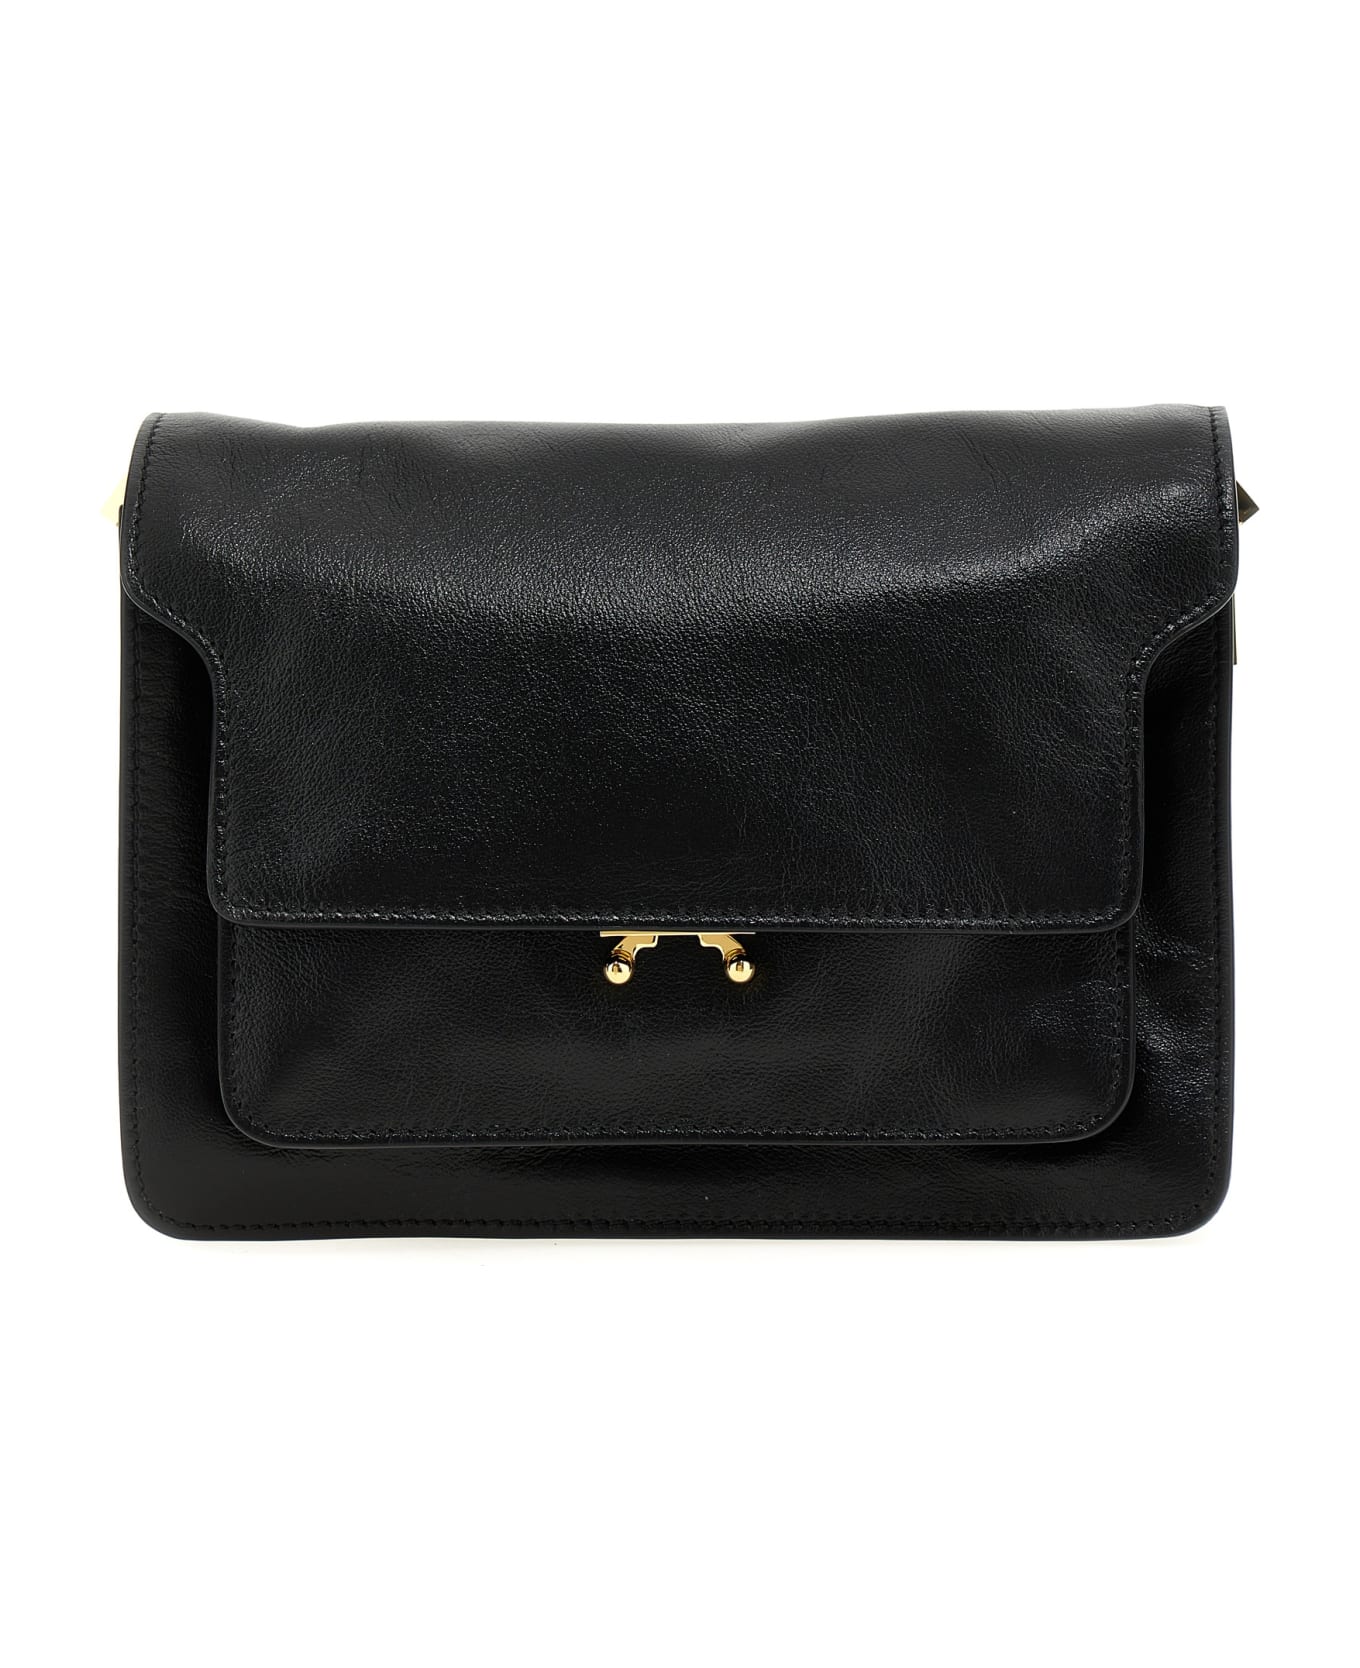 TRUNK SOFT large bag in black leather